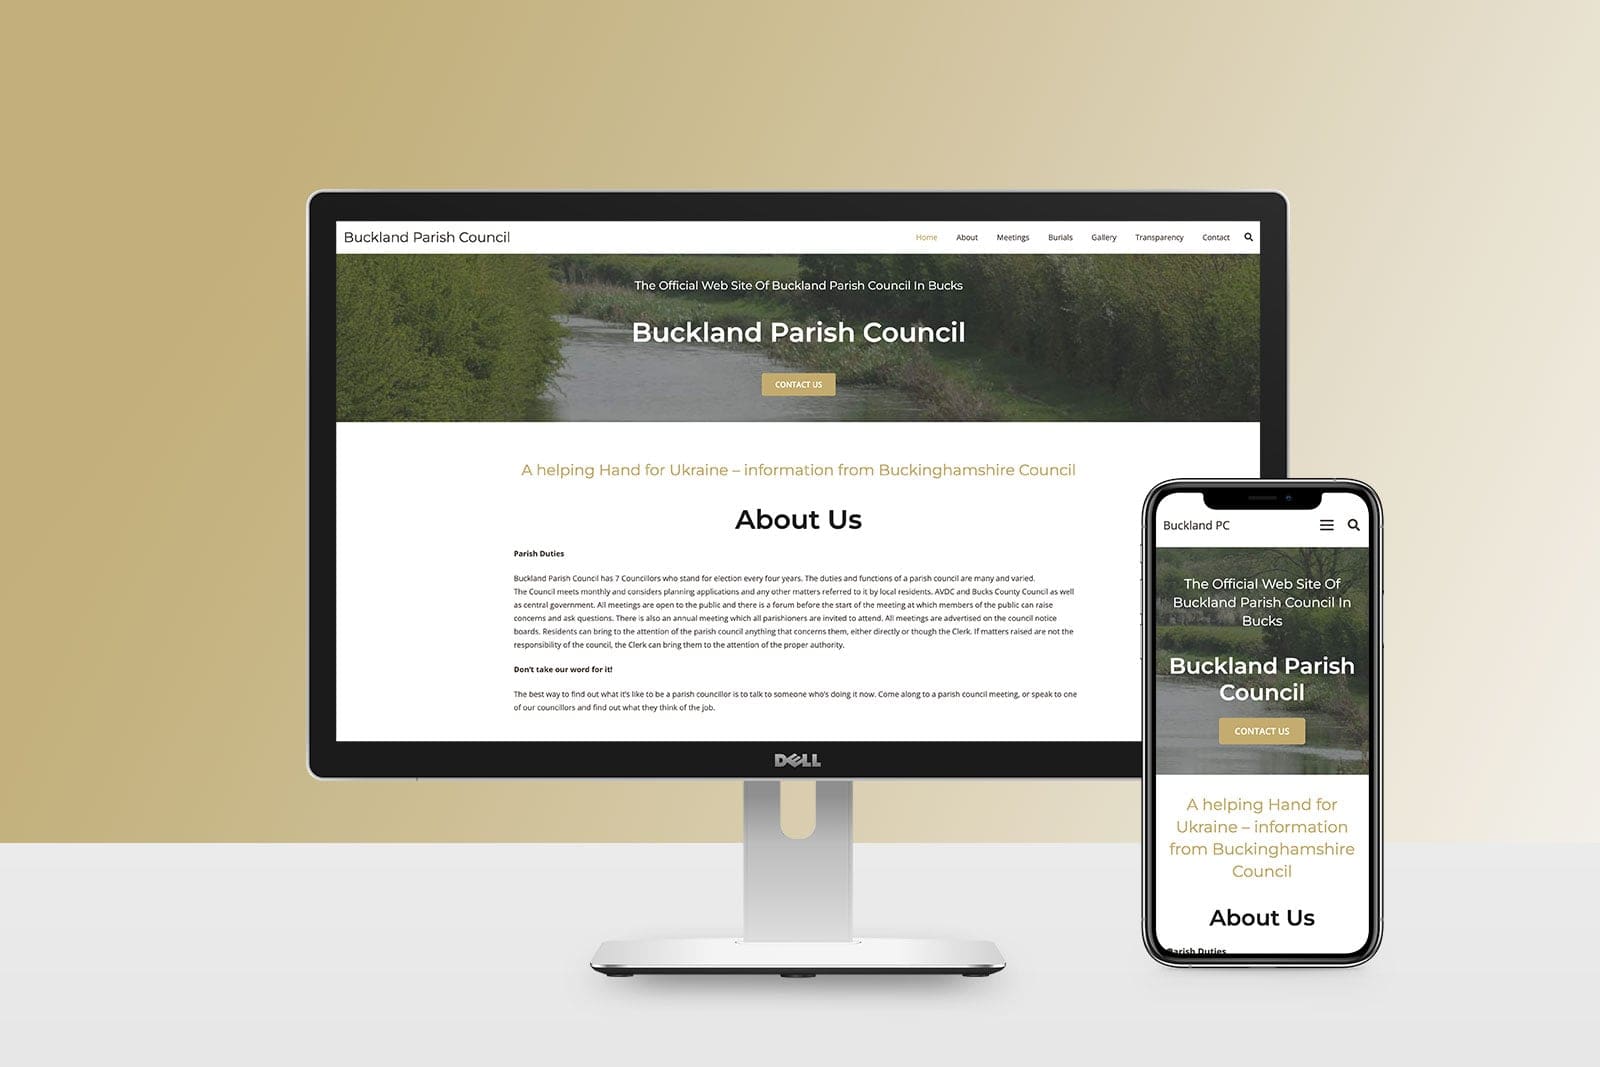 Desktop and Mobile View of the landing page for Buckland Parish Council